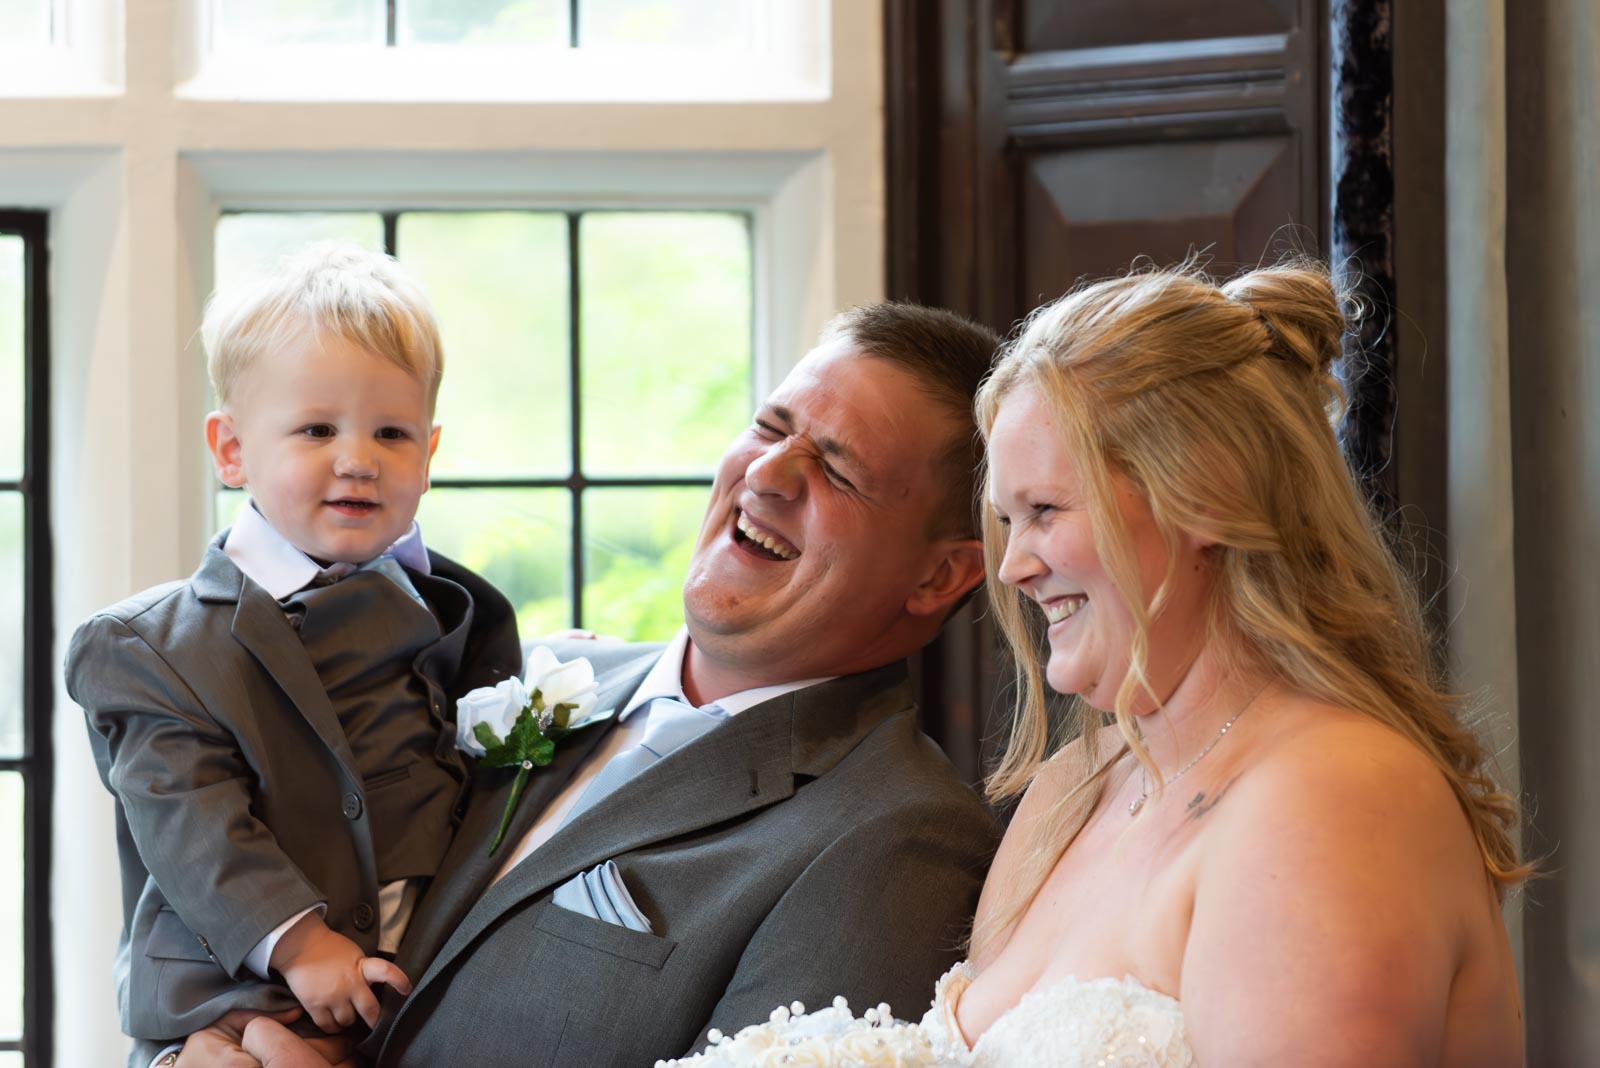 Wedding Photographer for Eliana and Jacob at Lewes Registry Office